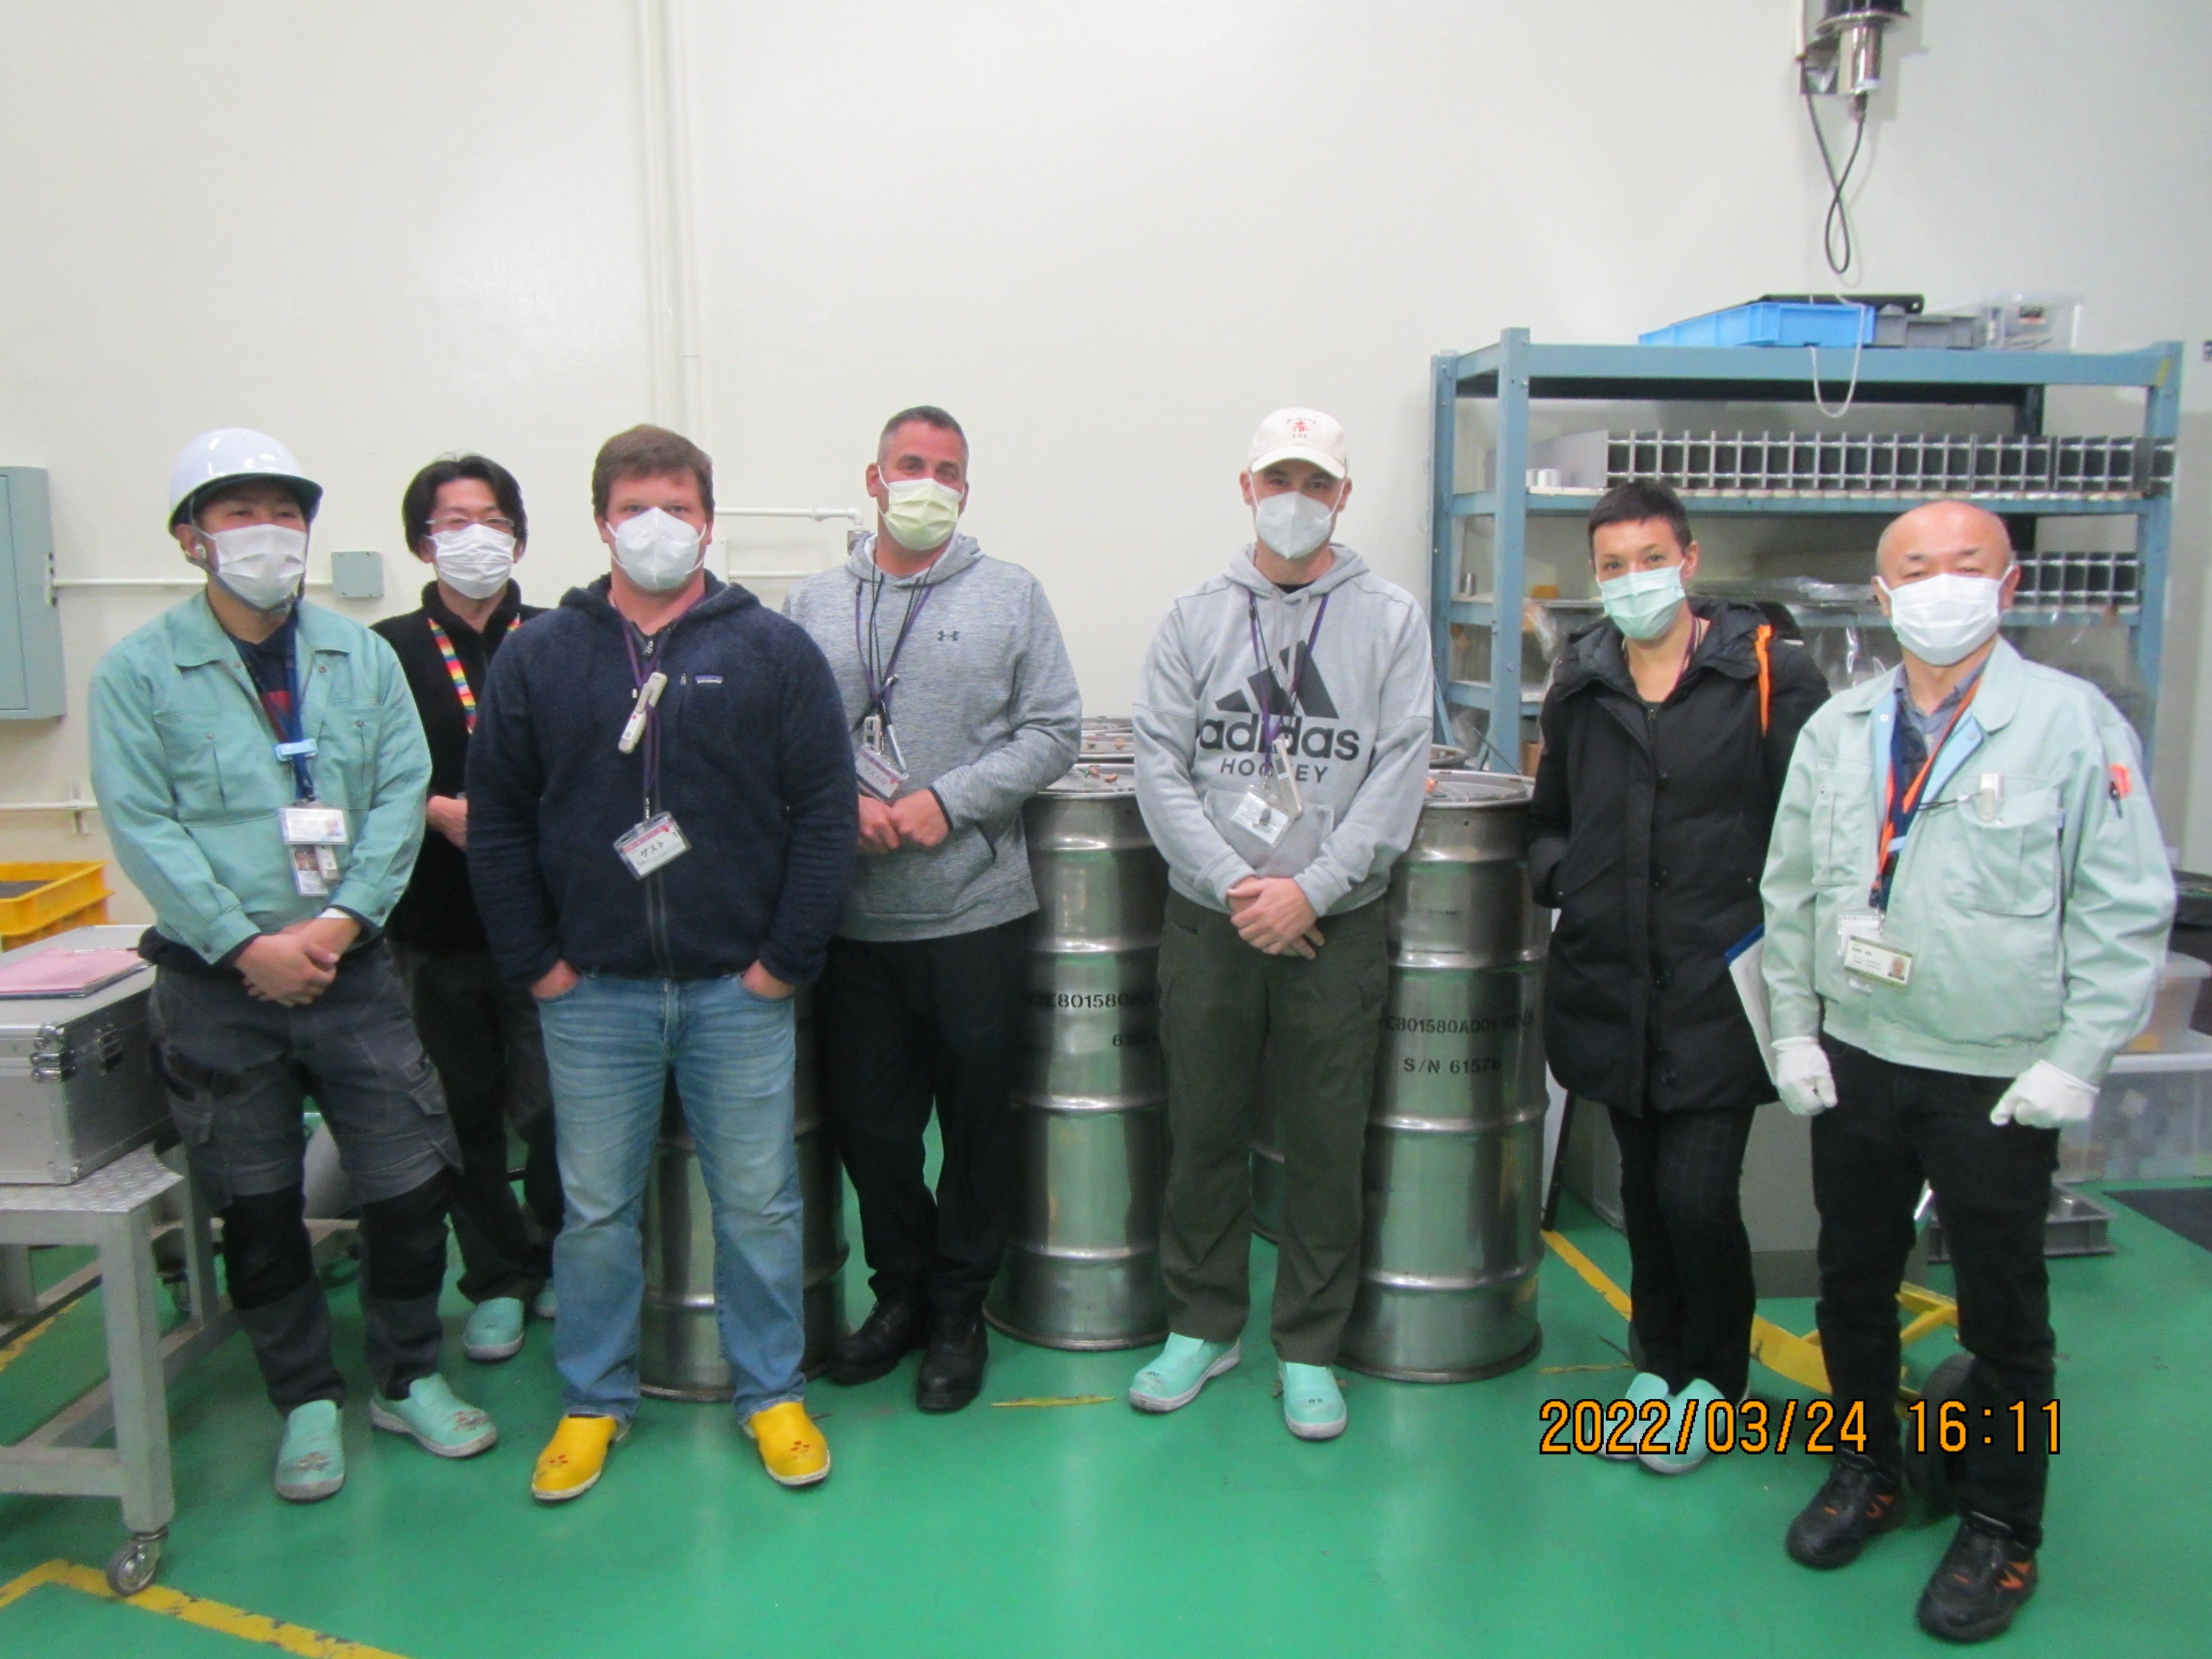 Y-12 technical experts removed around 45 kilograms of HEU from Kyoto University